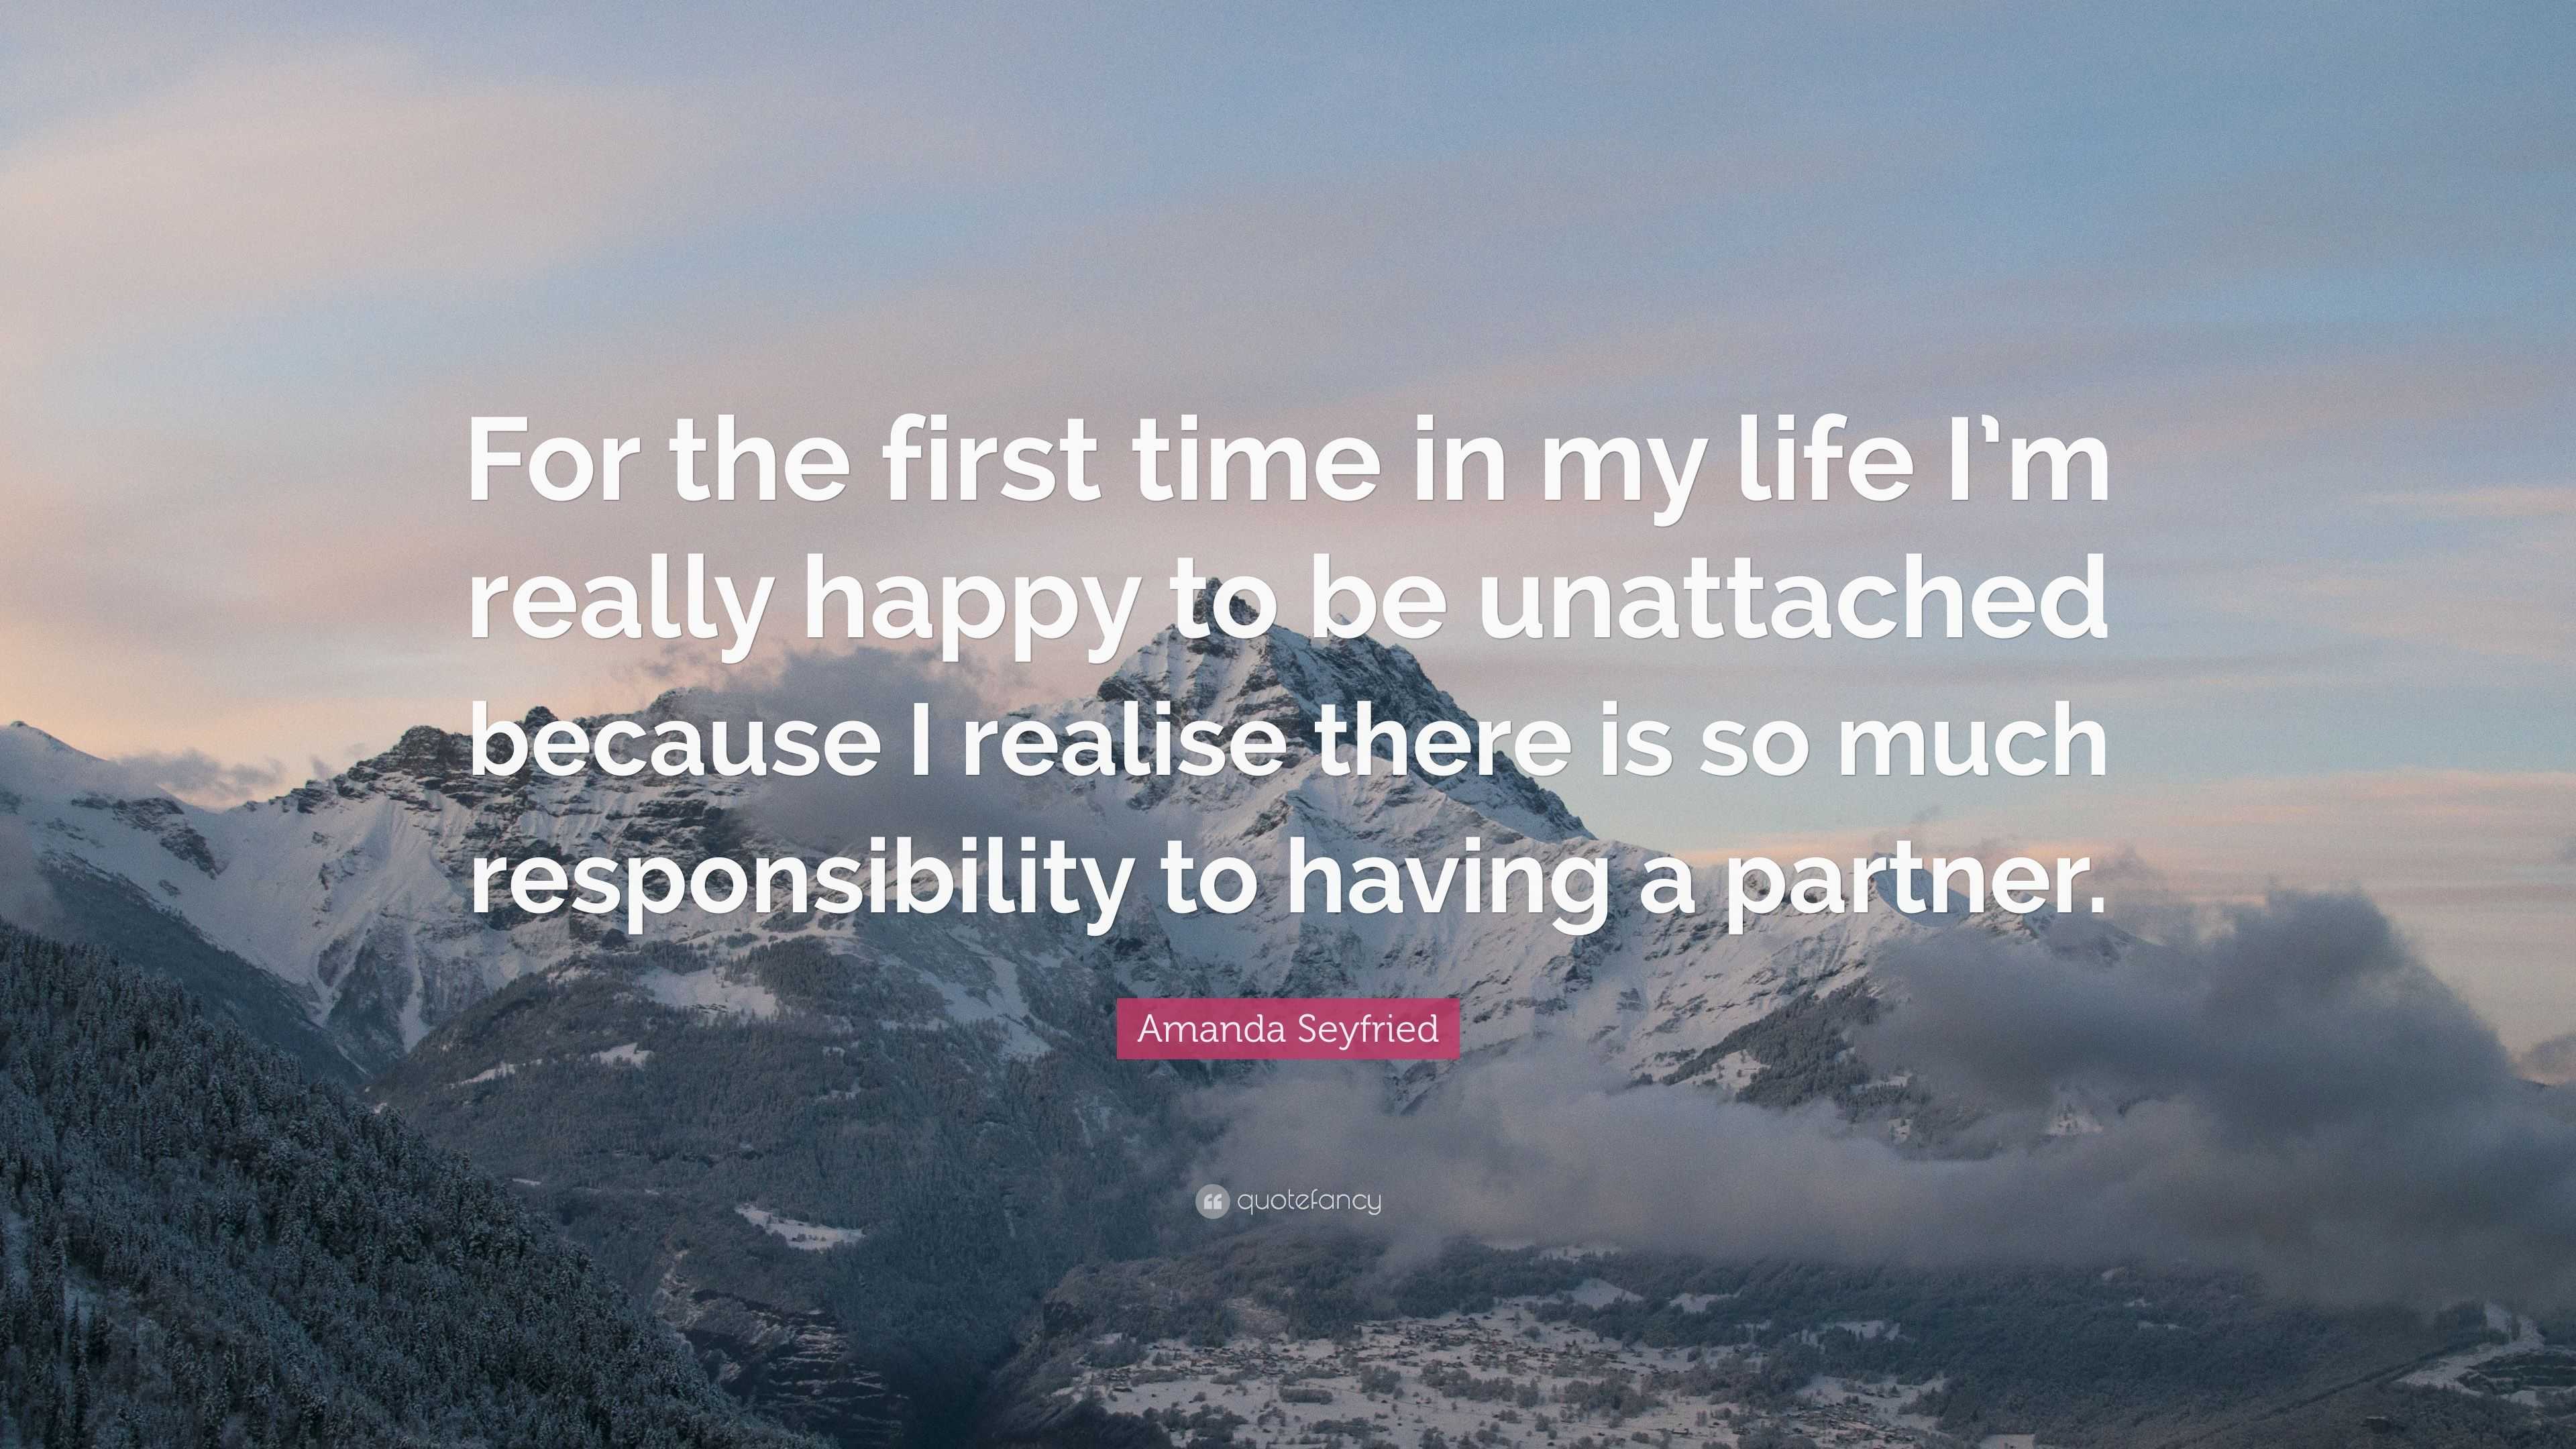 Amanda Seyfried Quote: “For the first time in my life I’m really happy ...